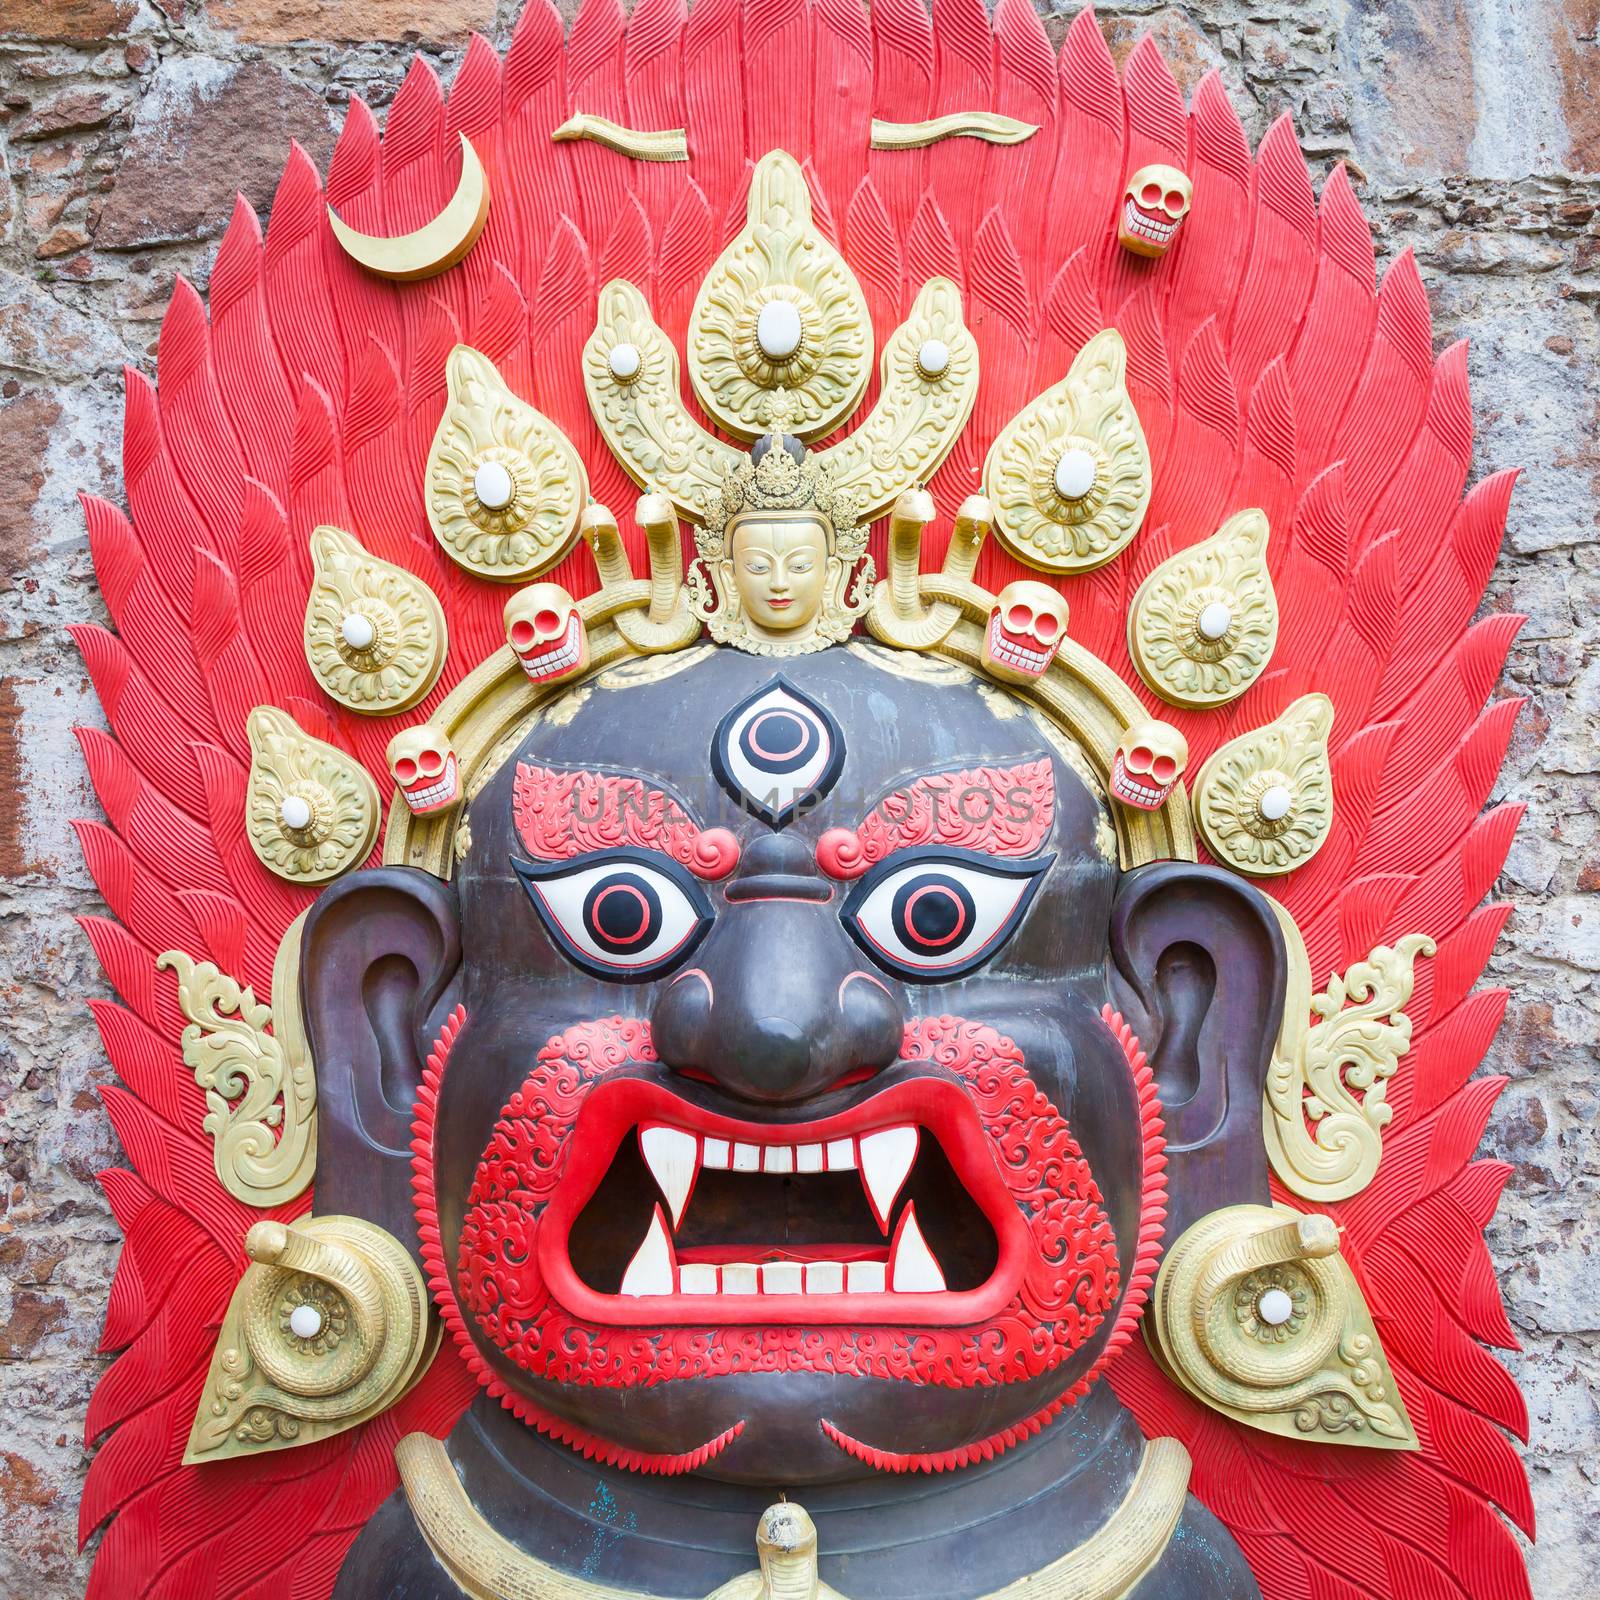 Bhairab Naach ("Bhairava's Dance") is an ancient masked dance performed by Newar community in the Kathmandu Valley of Nepal as part of the Indra Jatra festival. This mask is used during the dance.